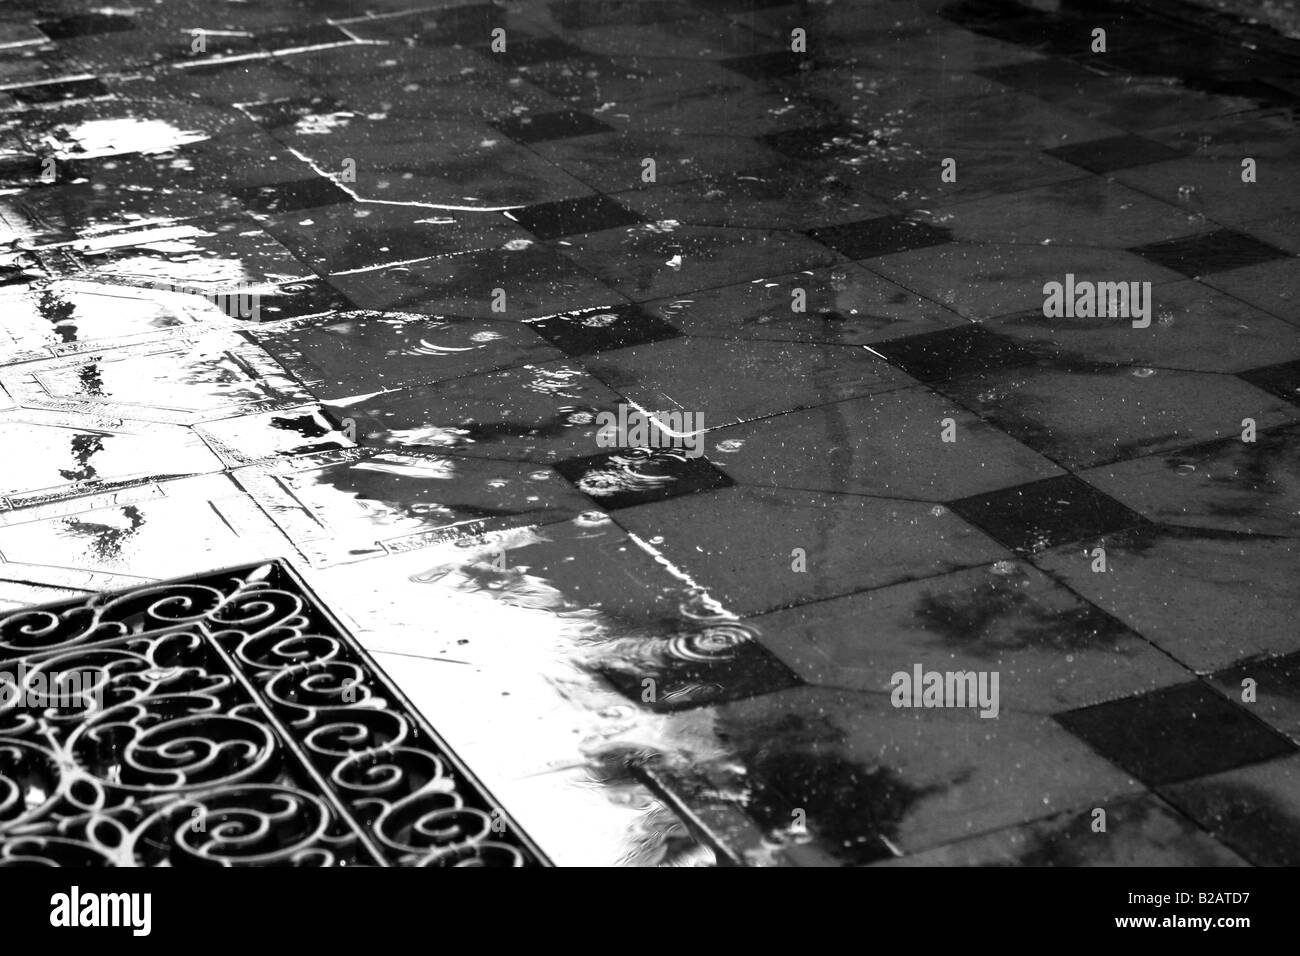 Detail of courtyard floor tiles on a rainy day Stock Photo